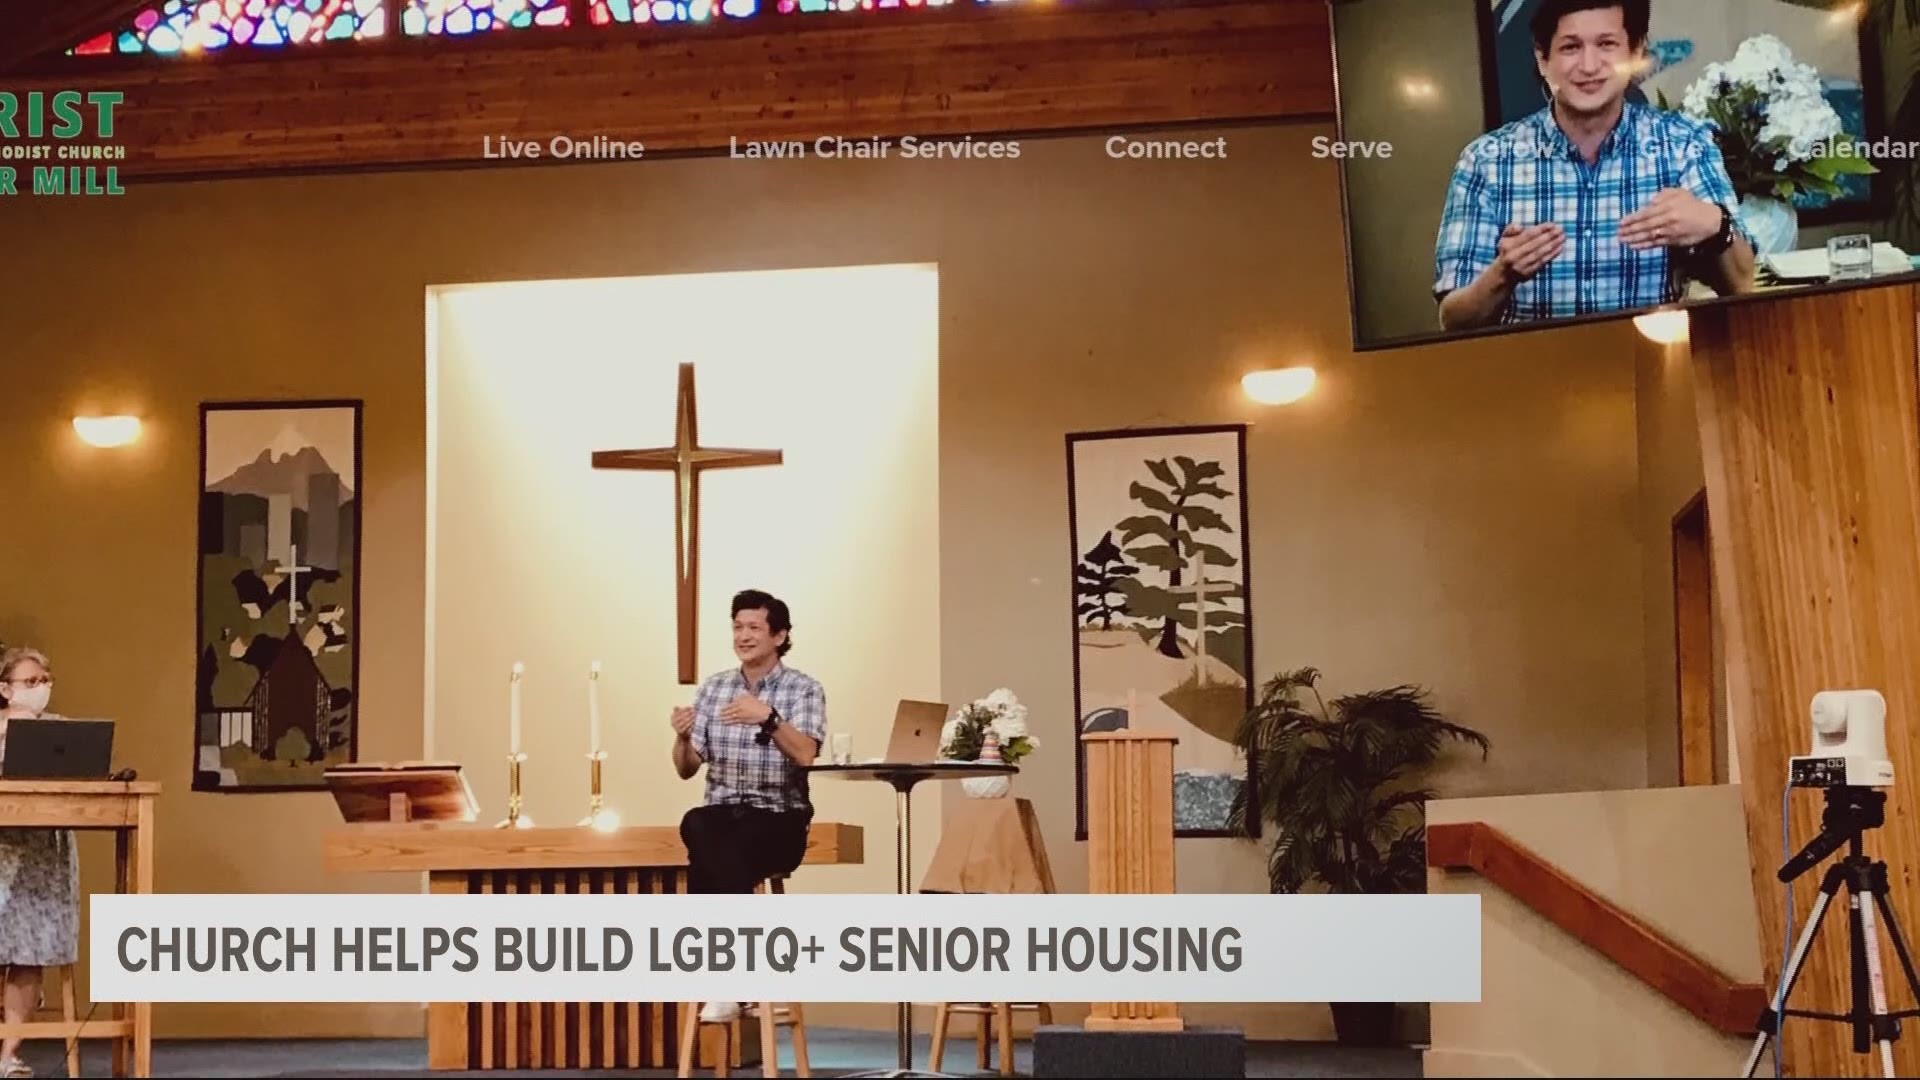 A church in the Cedar Mills neighborhood is designating land to help build affordable housing for LGBTQ+ seniors, which would be the first in Oregon.